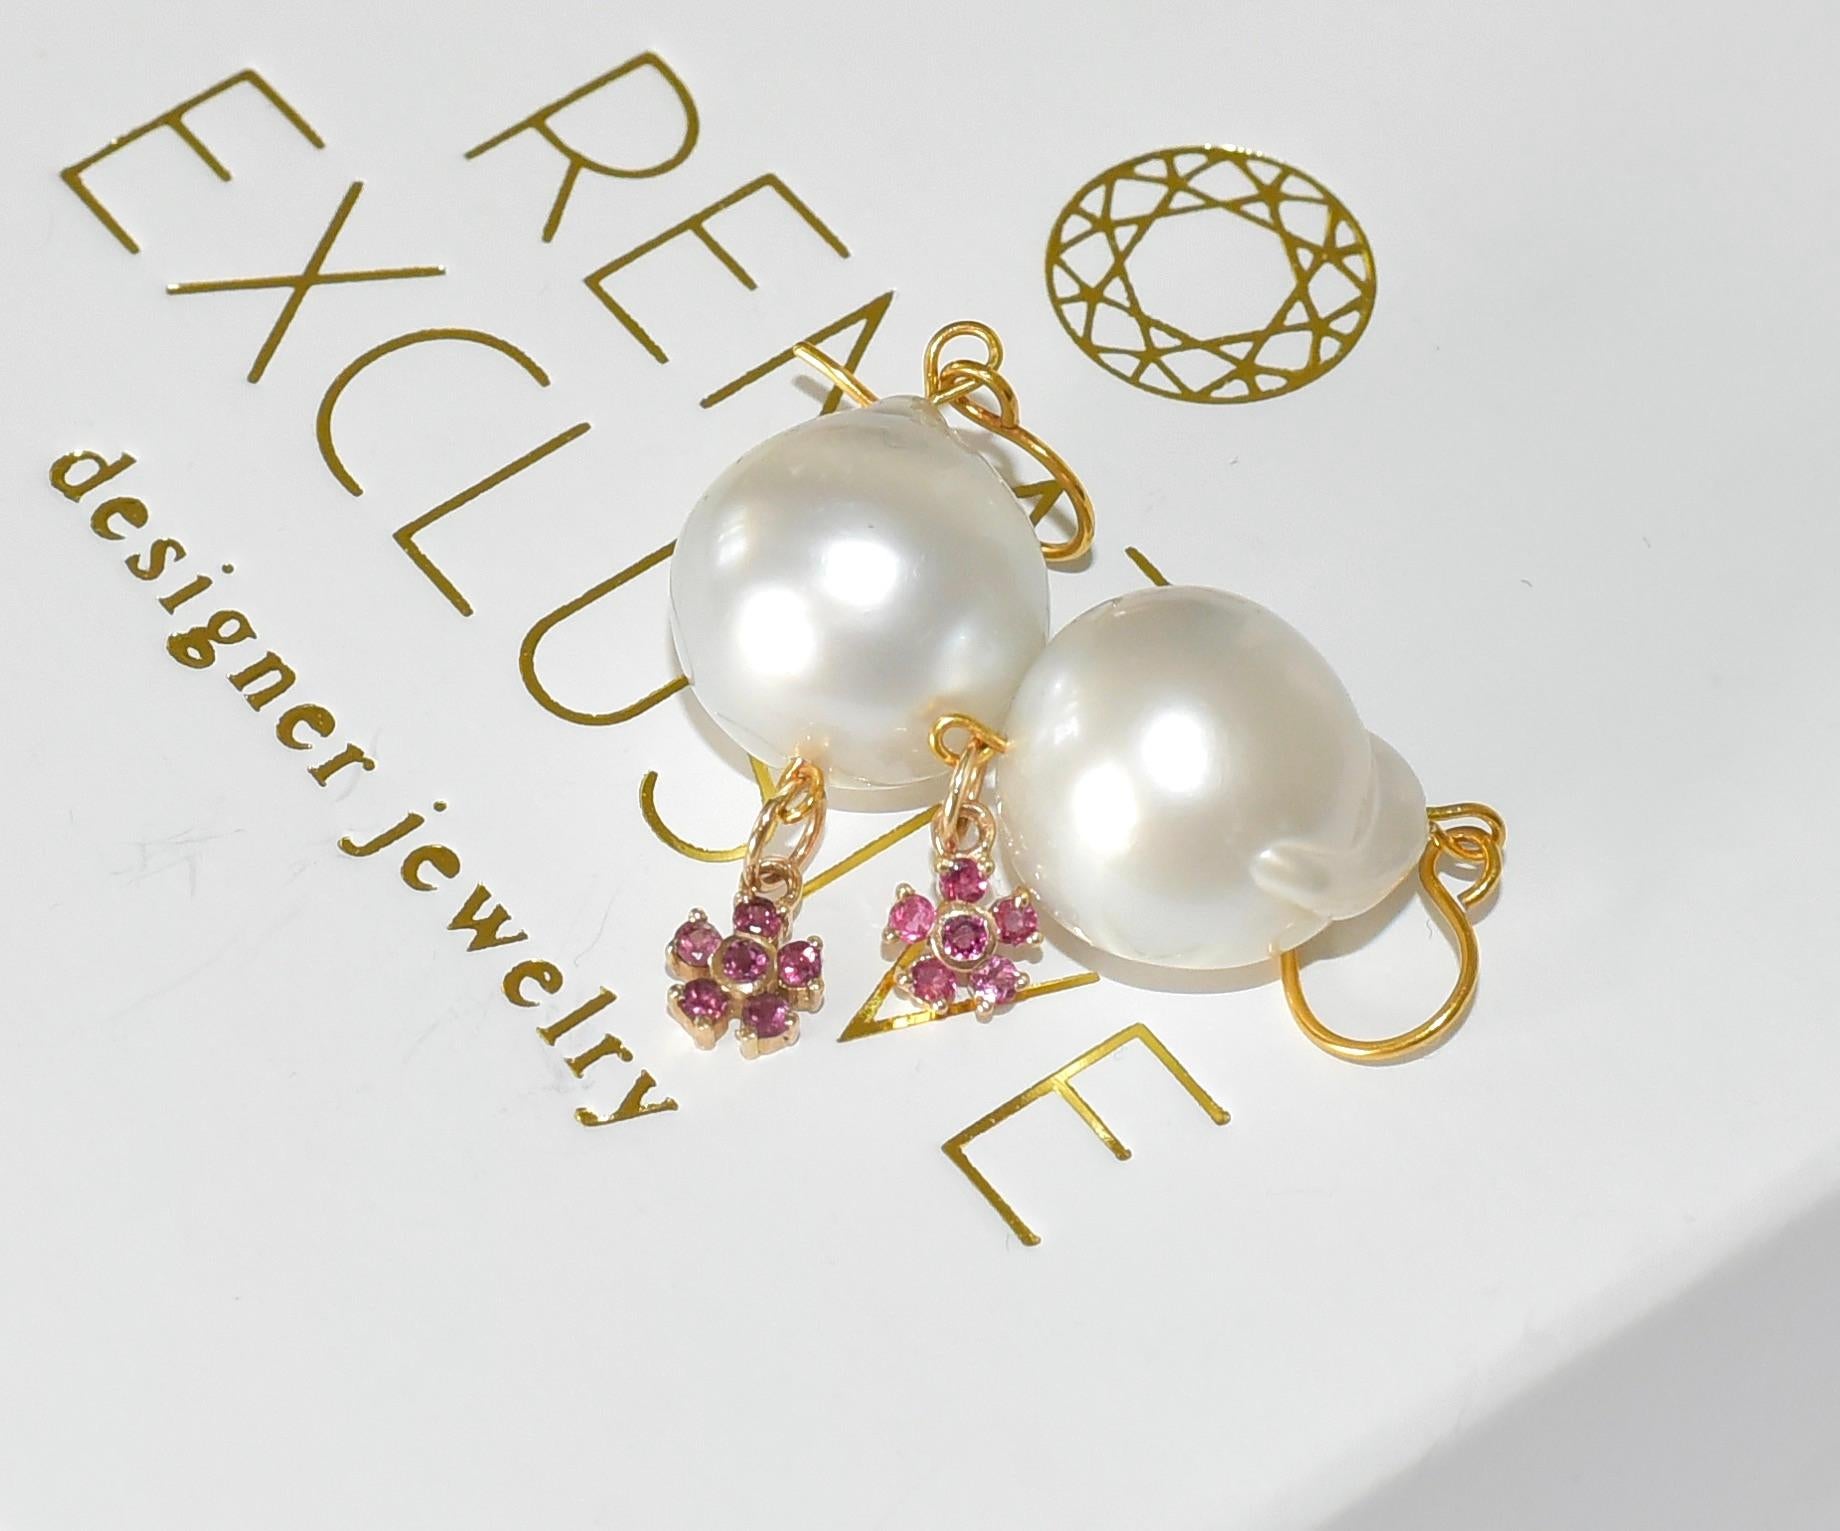 Bead White South Sea Pearl, Pink Tourmaline Daisy Charm in 14K Solid Yellow Gold